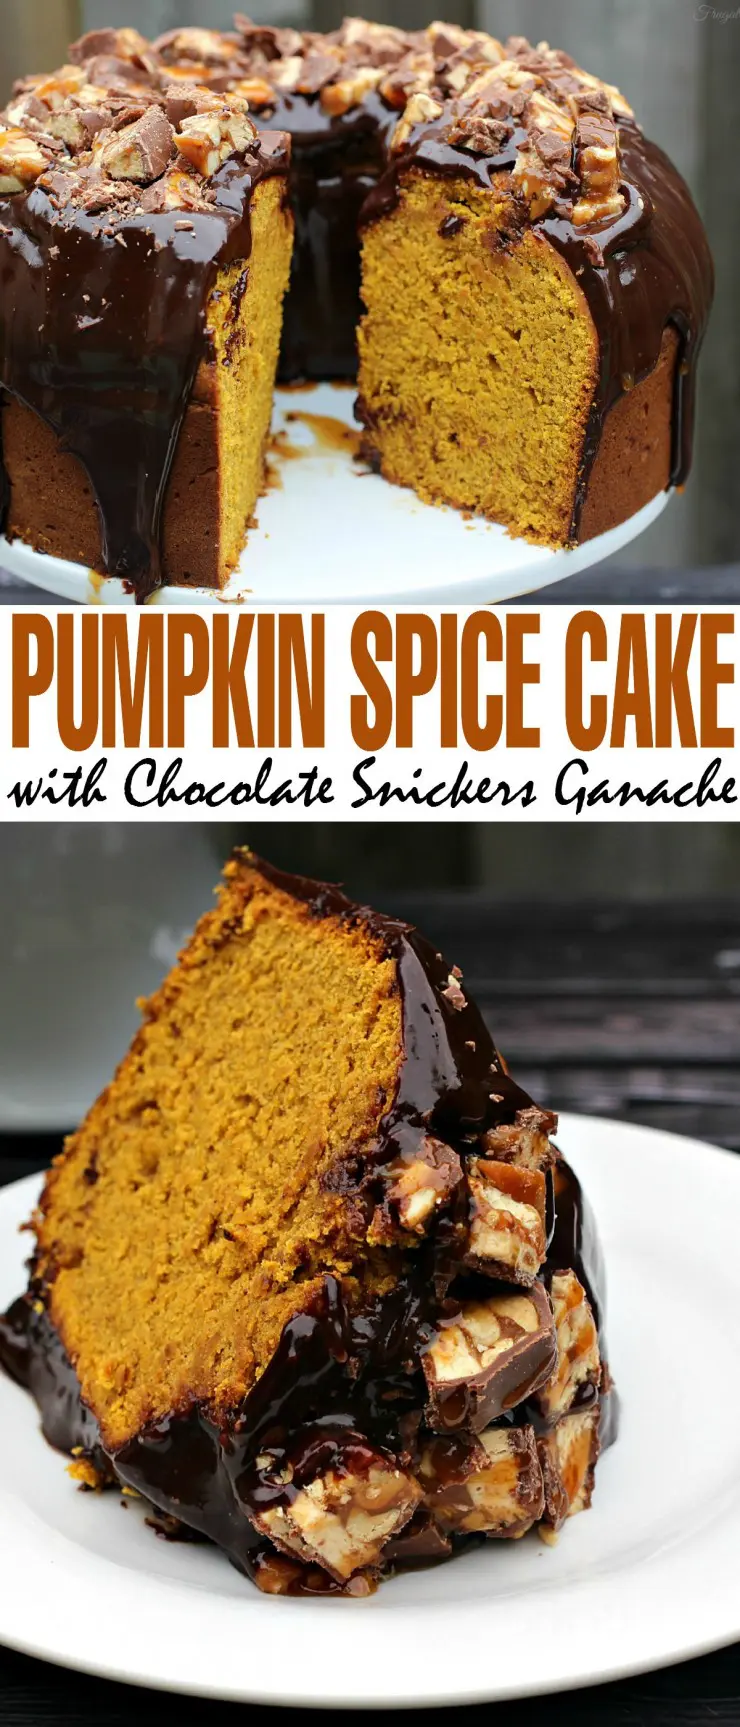 This Pumpkin Spice Cake with Chocolate Snickers Ganache is a decadent Fall Dessert that will have everyone asking you for the recipe!